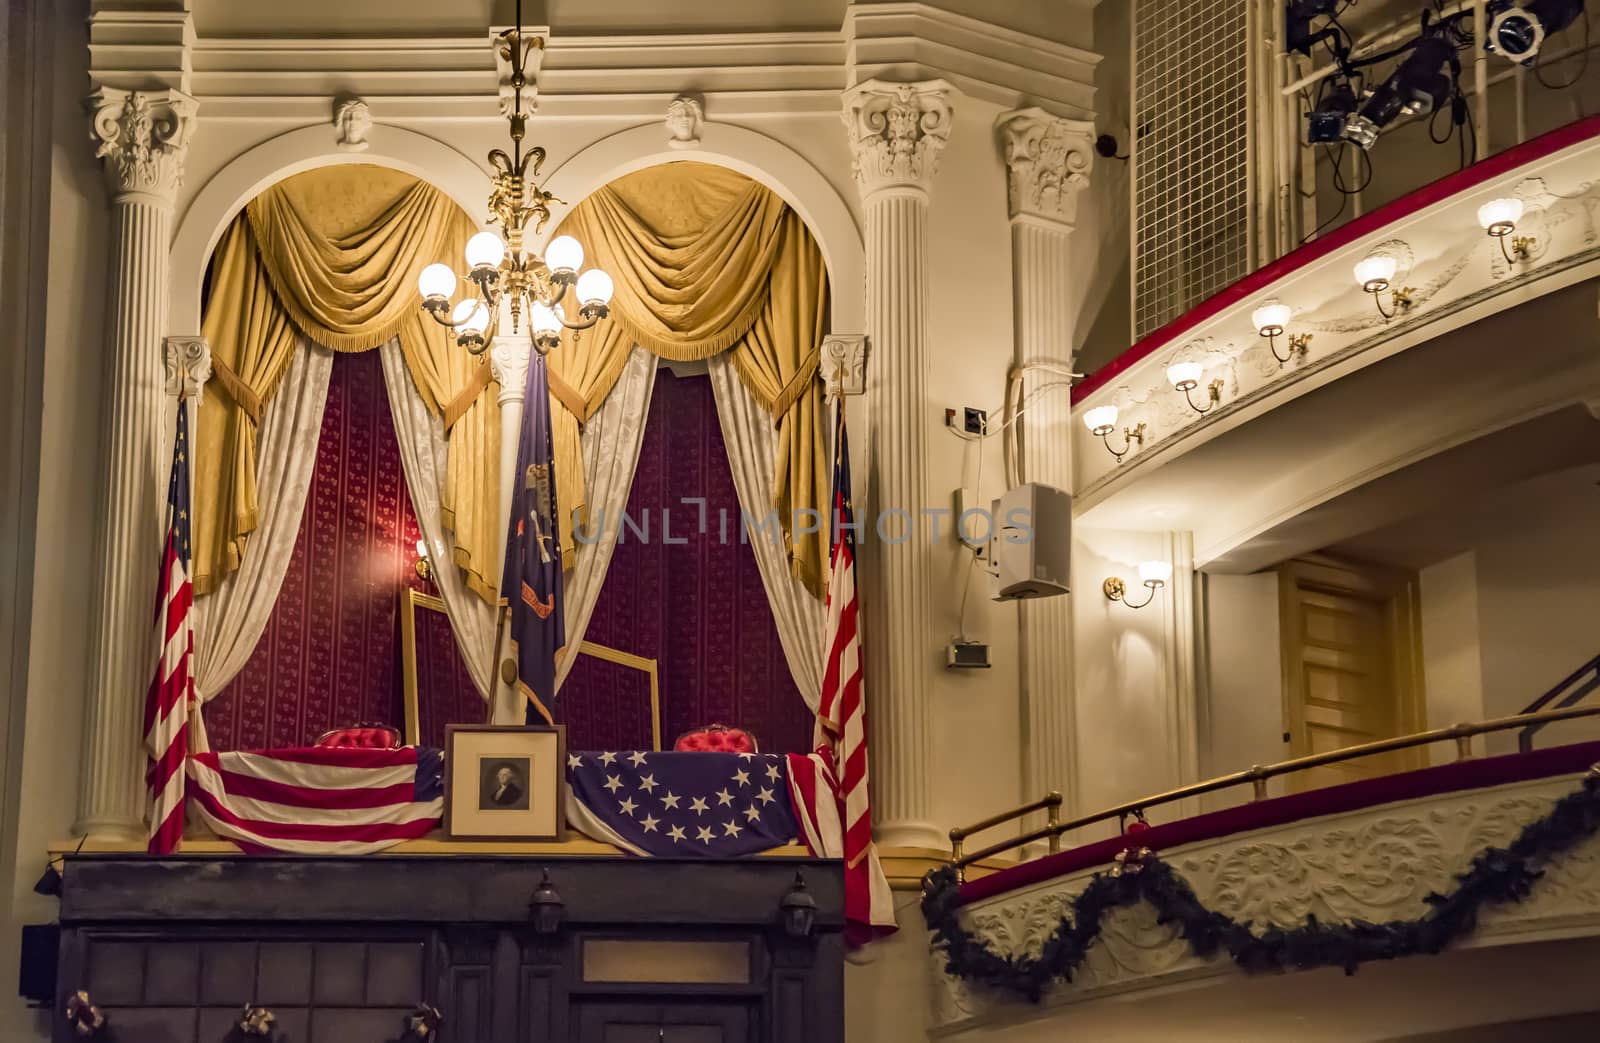 WASHINGTON, DC - DECEMBER 20: The historic Ford's Theatre, the site of President Lincoln's assassination, continues to host theater productions today, on December 20, 2017 in Washington DC